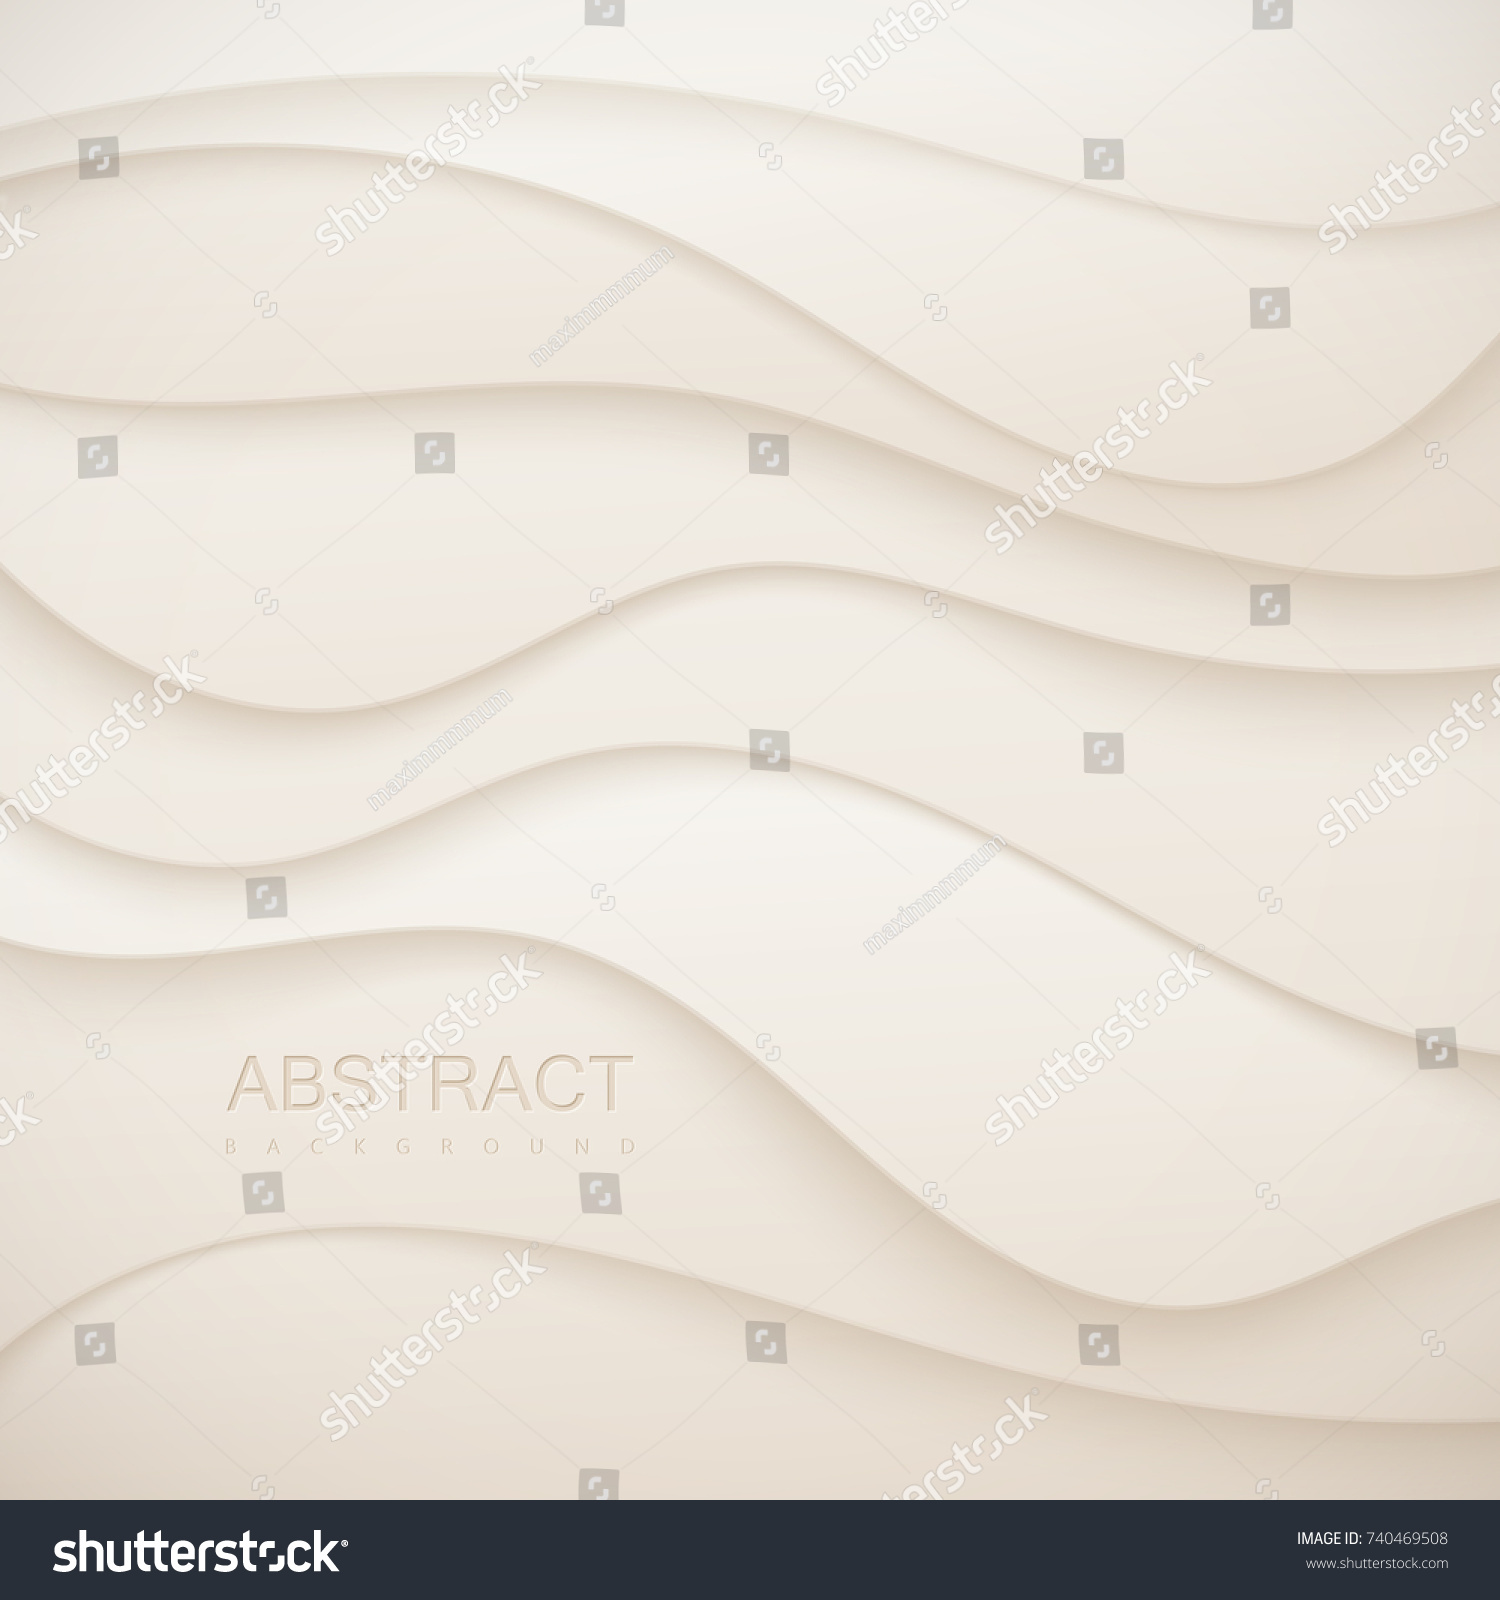 Abstract White Paper Cut Background Tiling Stock Vector 740469508 ...